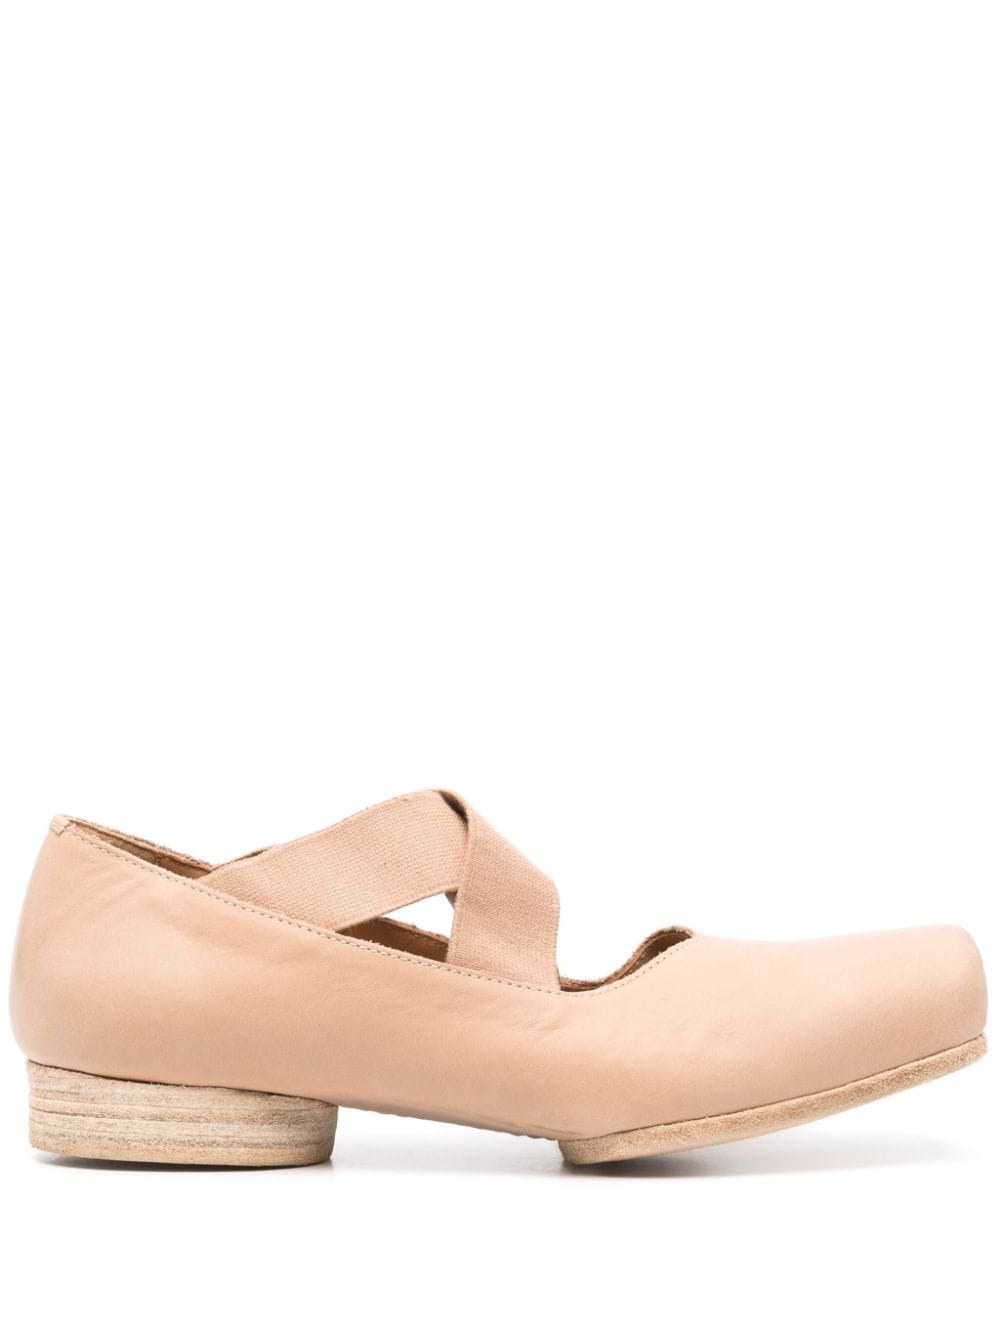 square-toe leather ballerina shoes